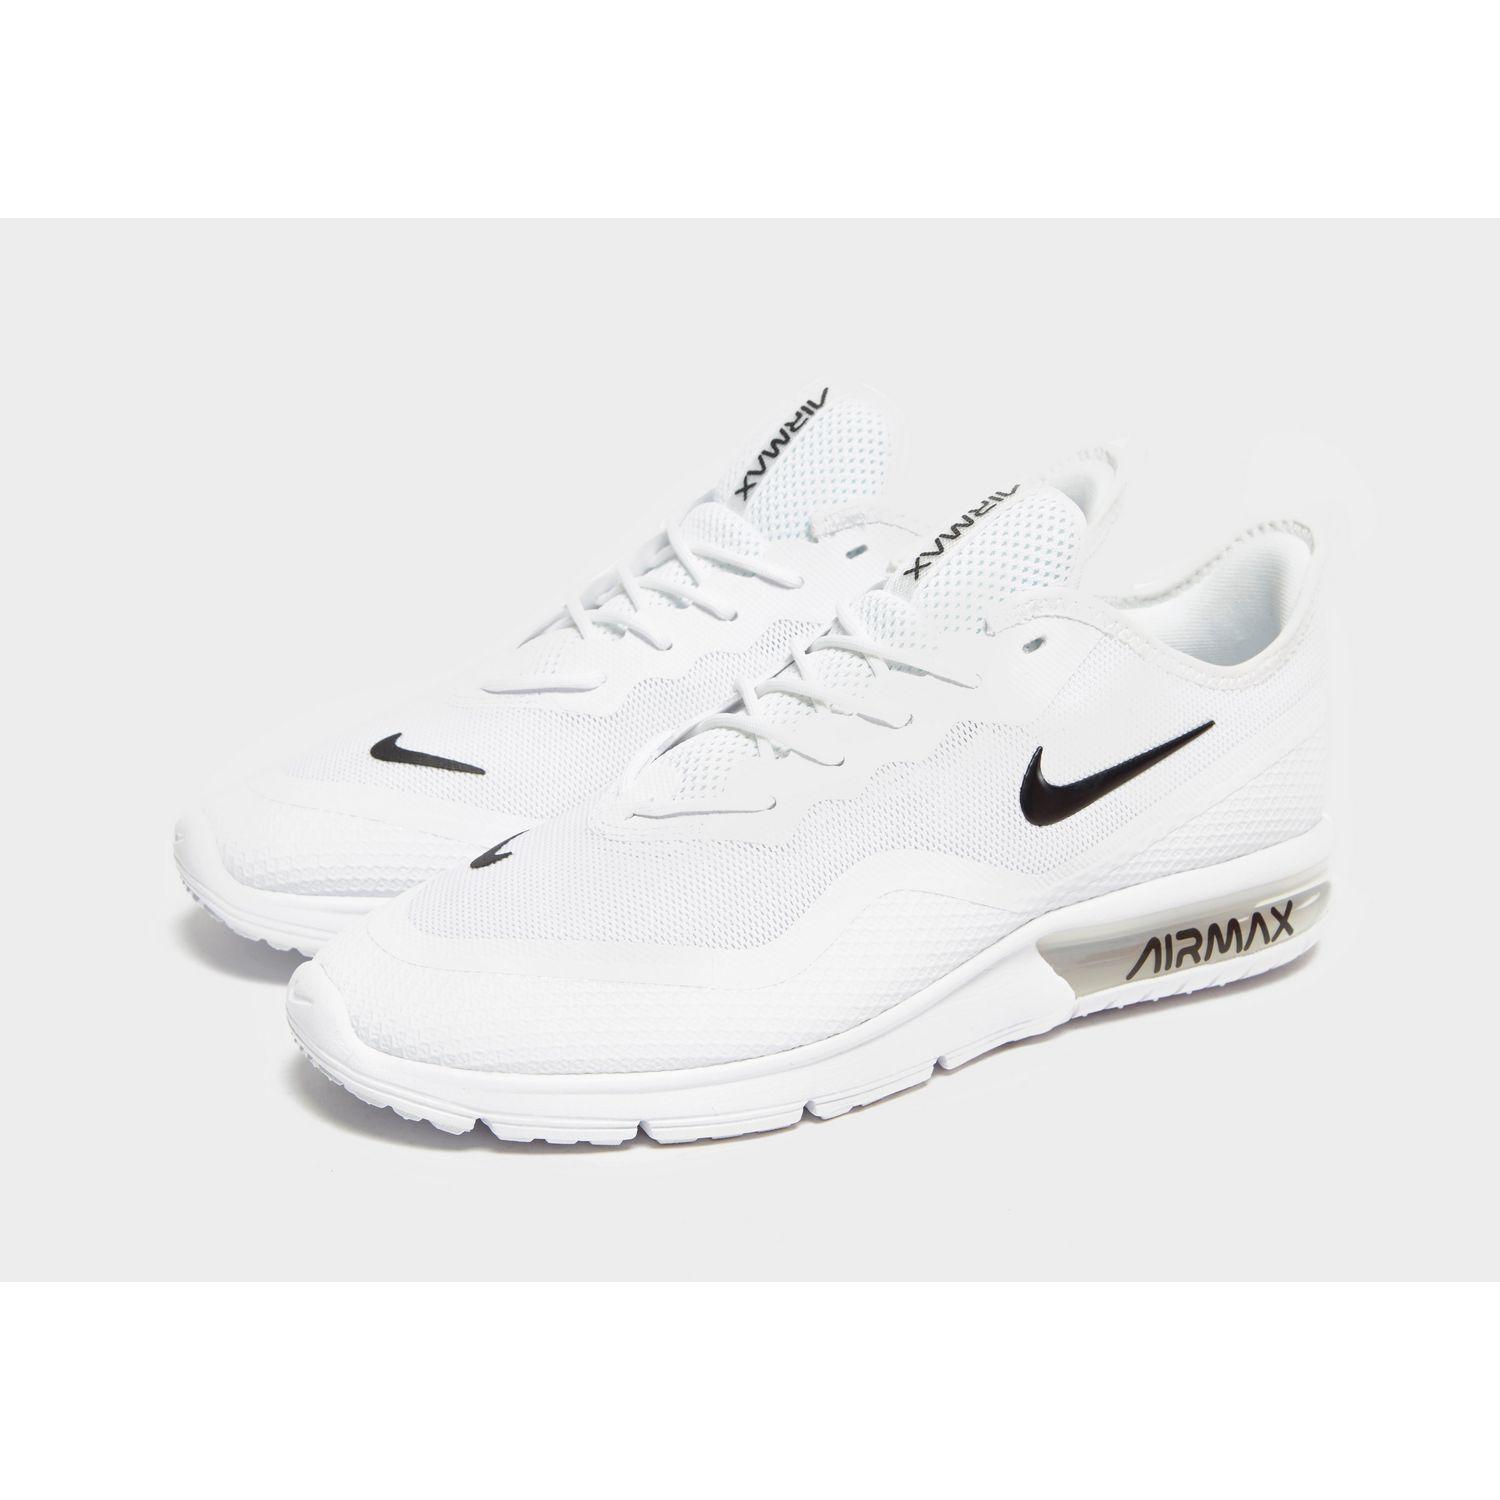 nike sequent 4.5 white